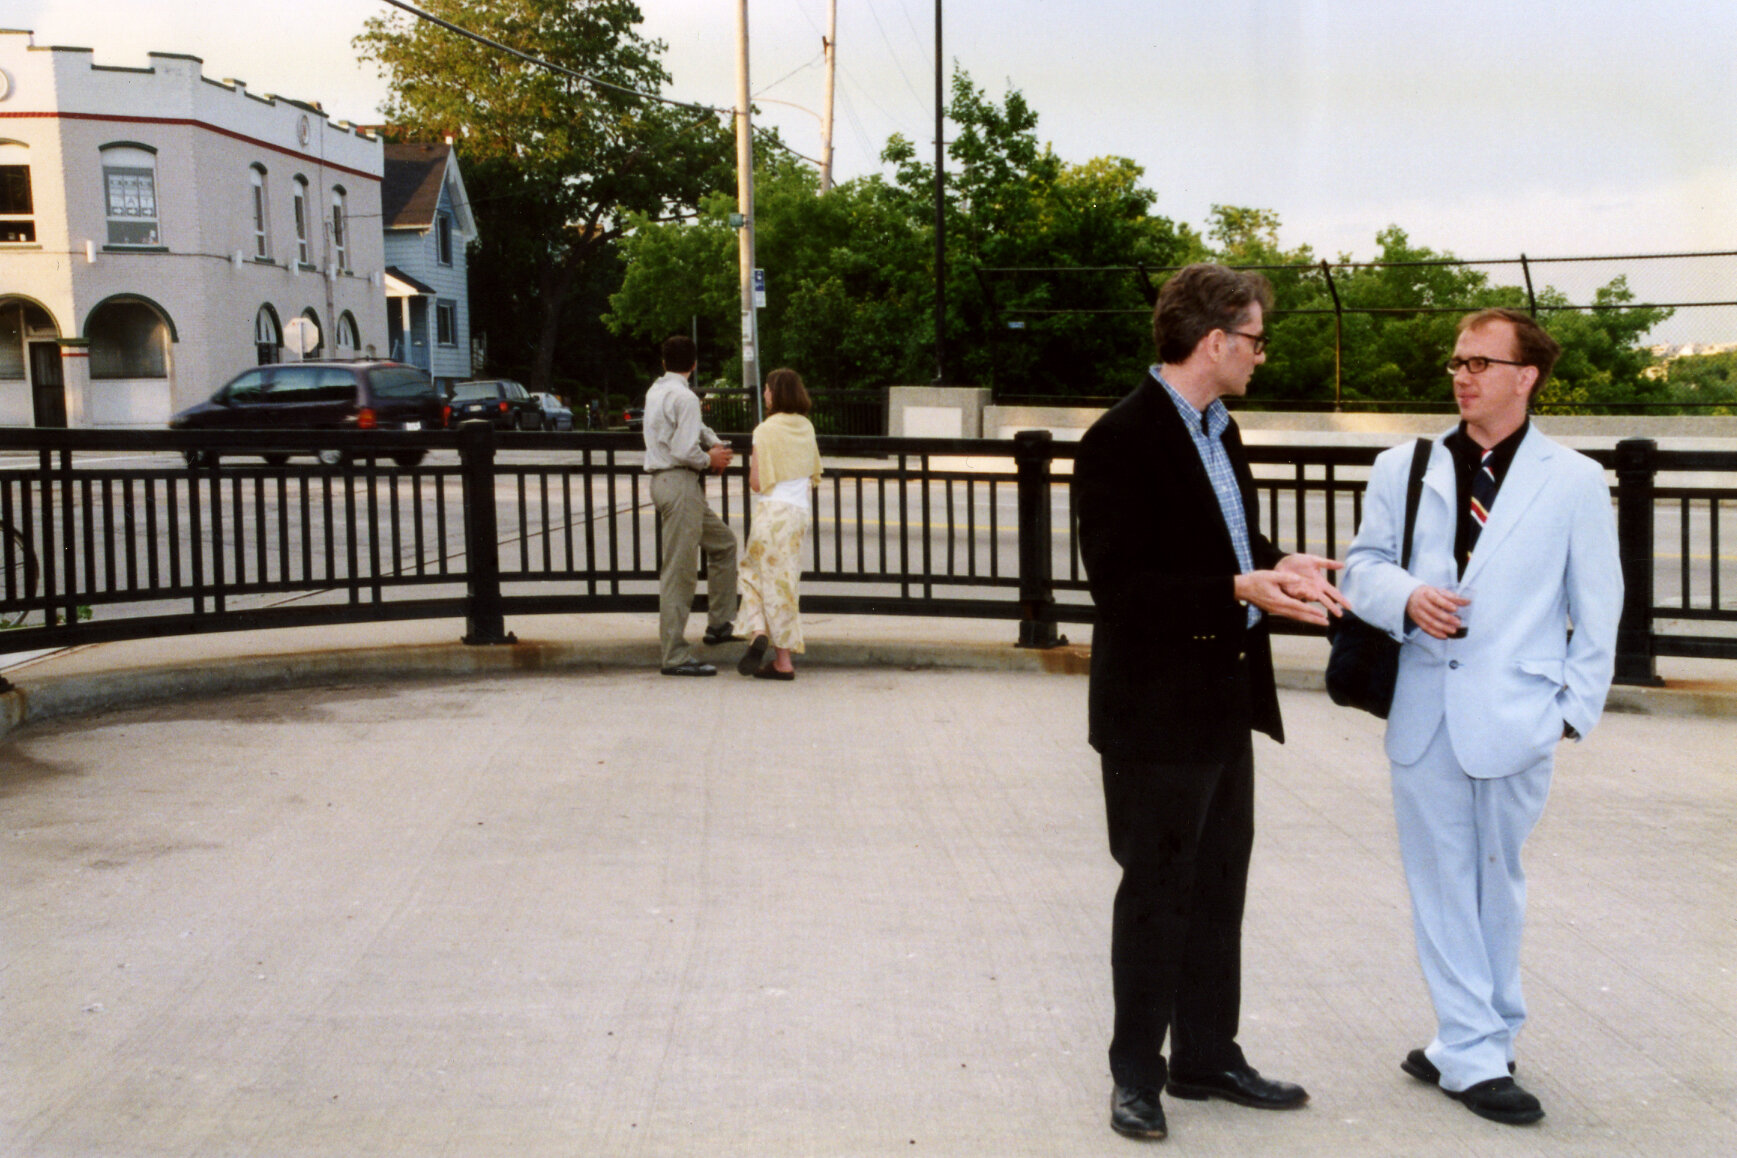 2 men, one in black suit, one in baby blue suit converse in middle of concrete area. 2nd pair stands behind them.